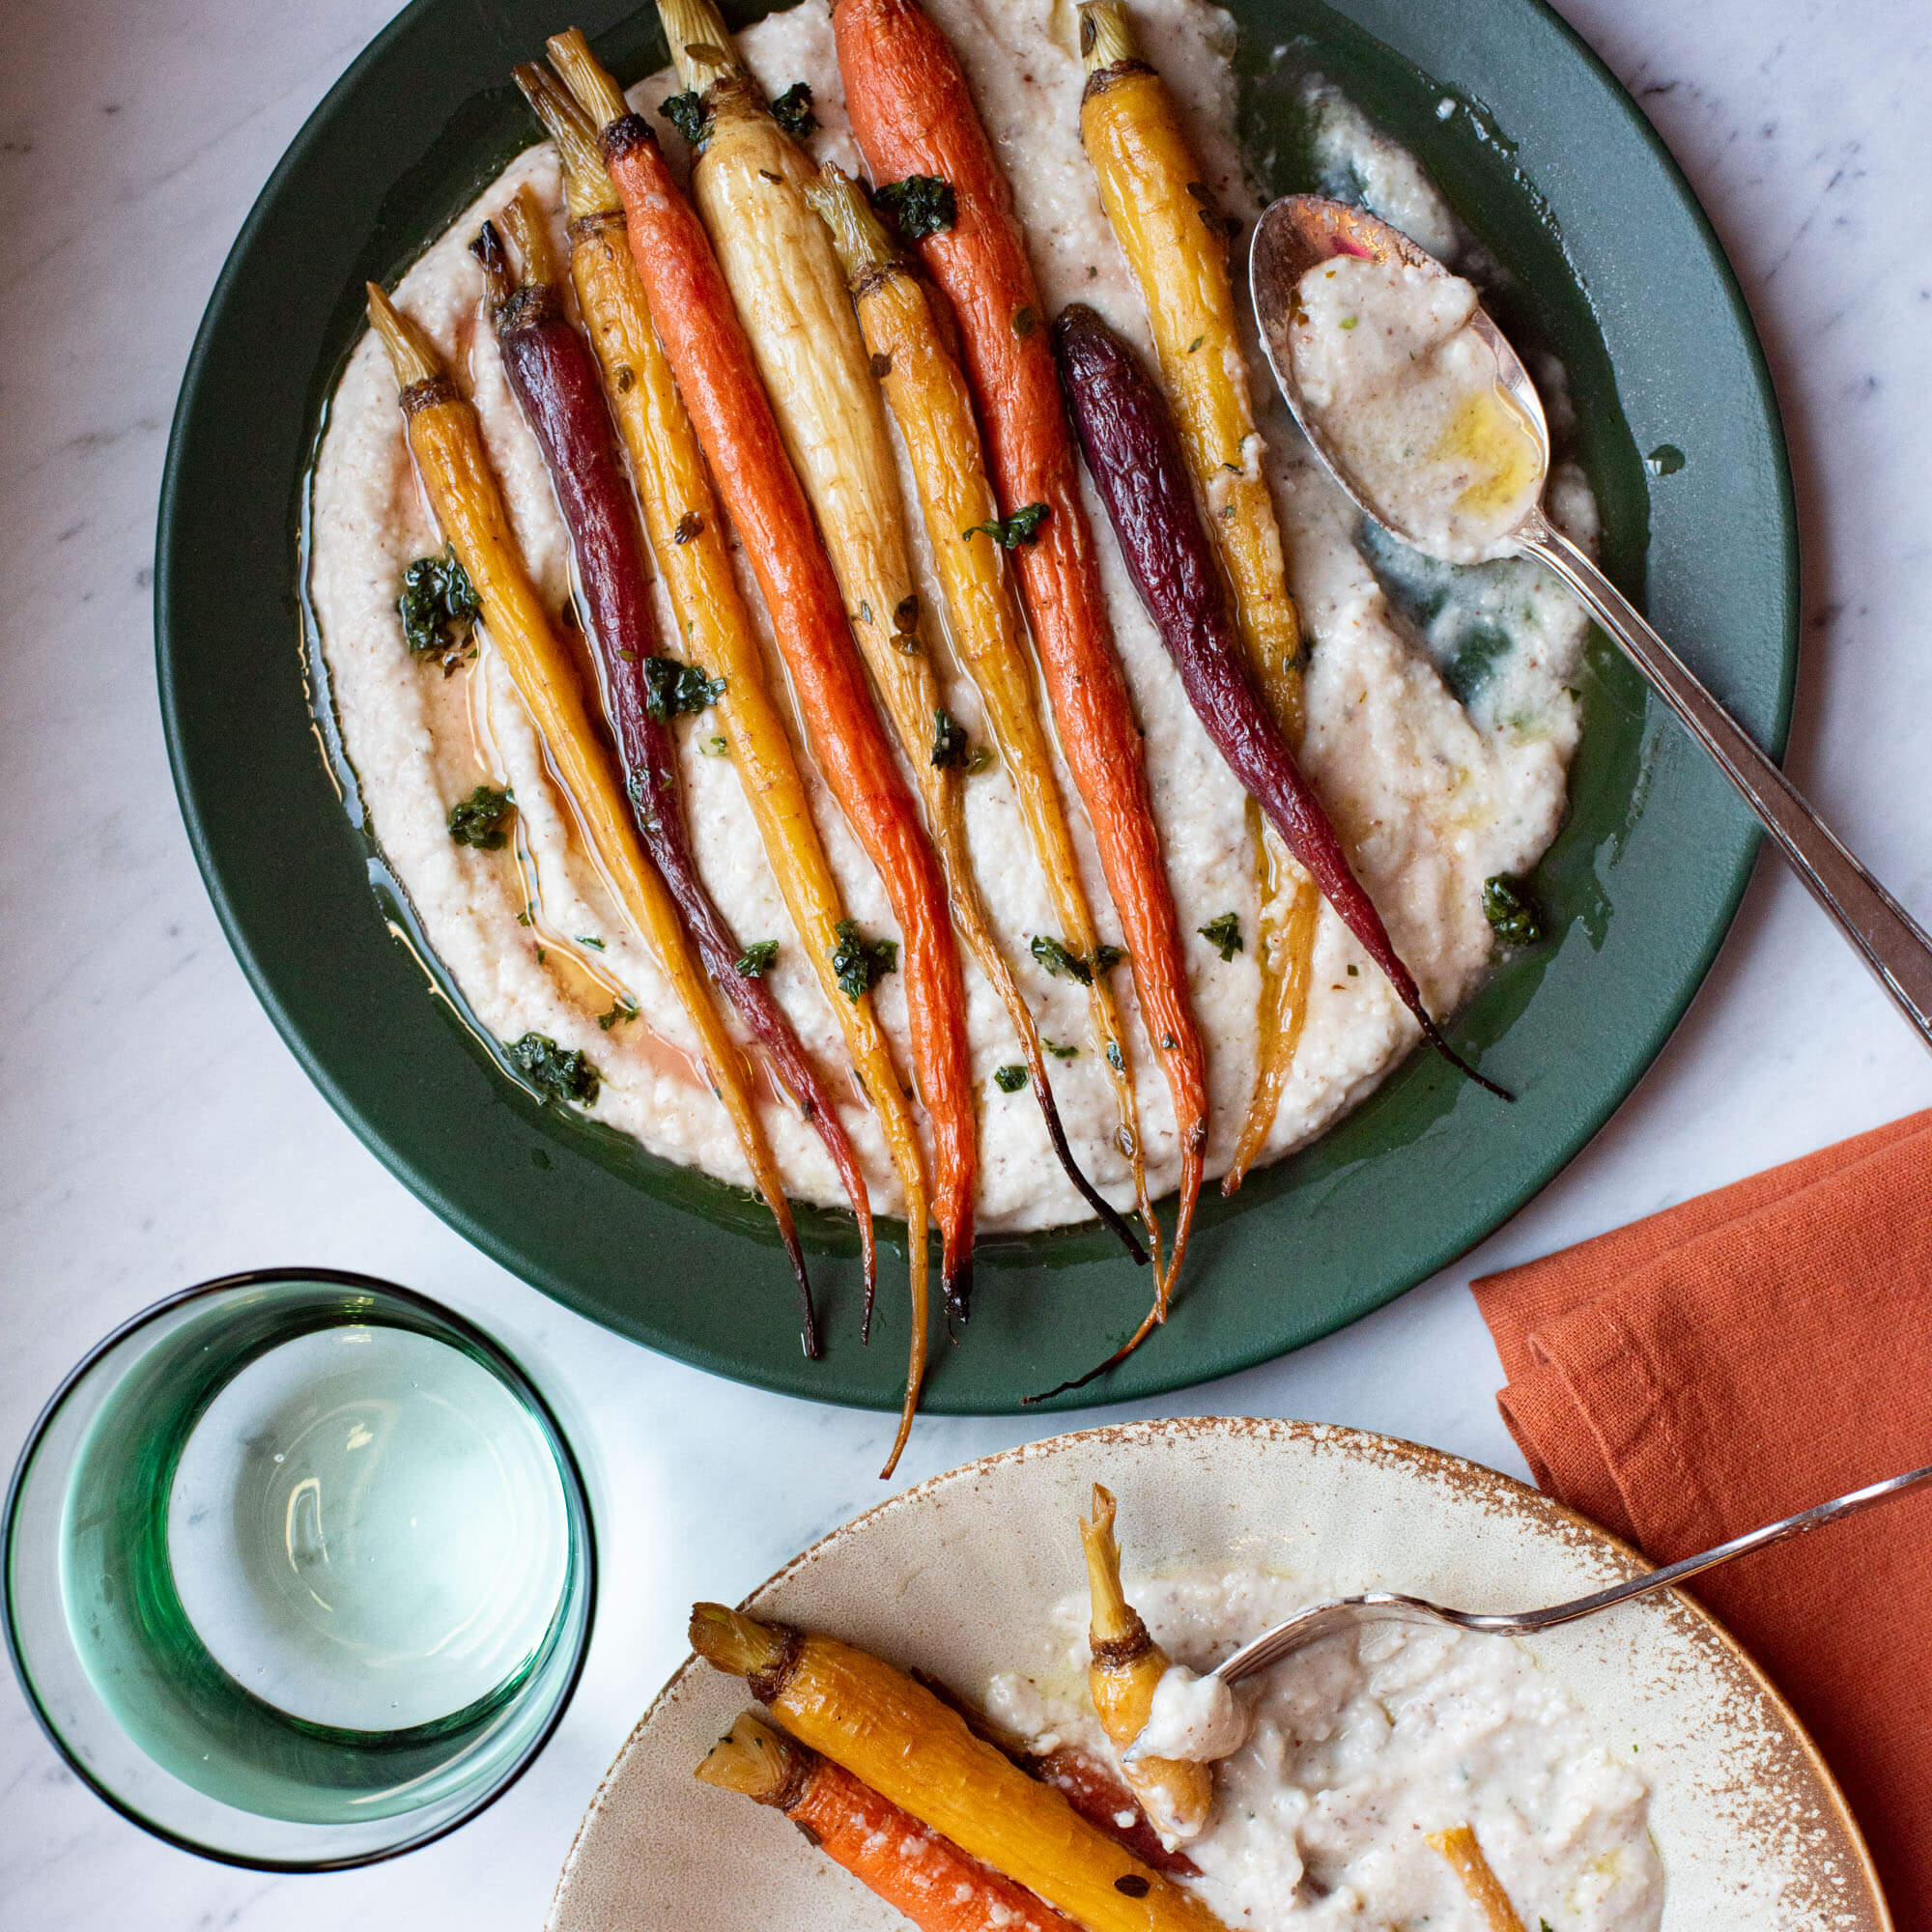 Roasted carrots over Cannellini and hazelnut purée